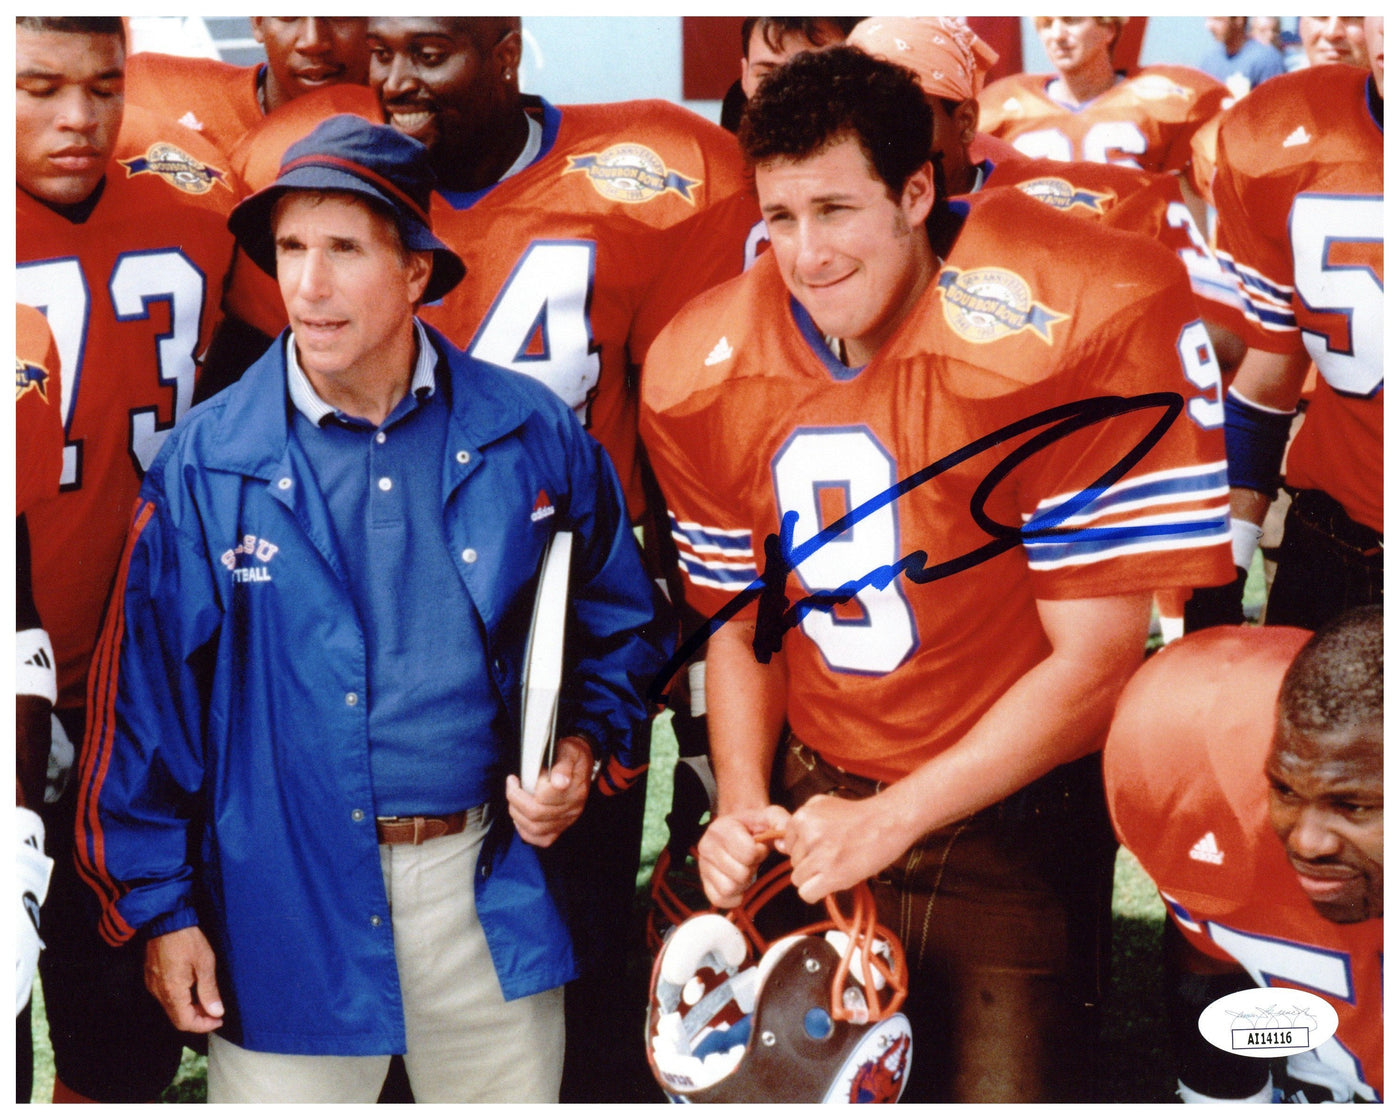 Henry Winkler Signed 8x10 Photo The Waterboy Coach Klein Autographed JSA COA